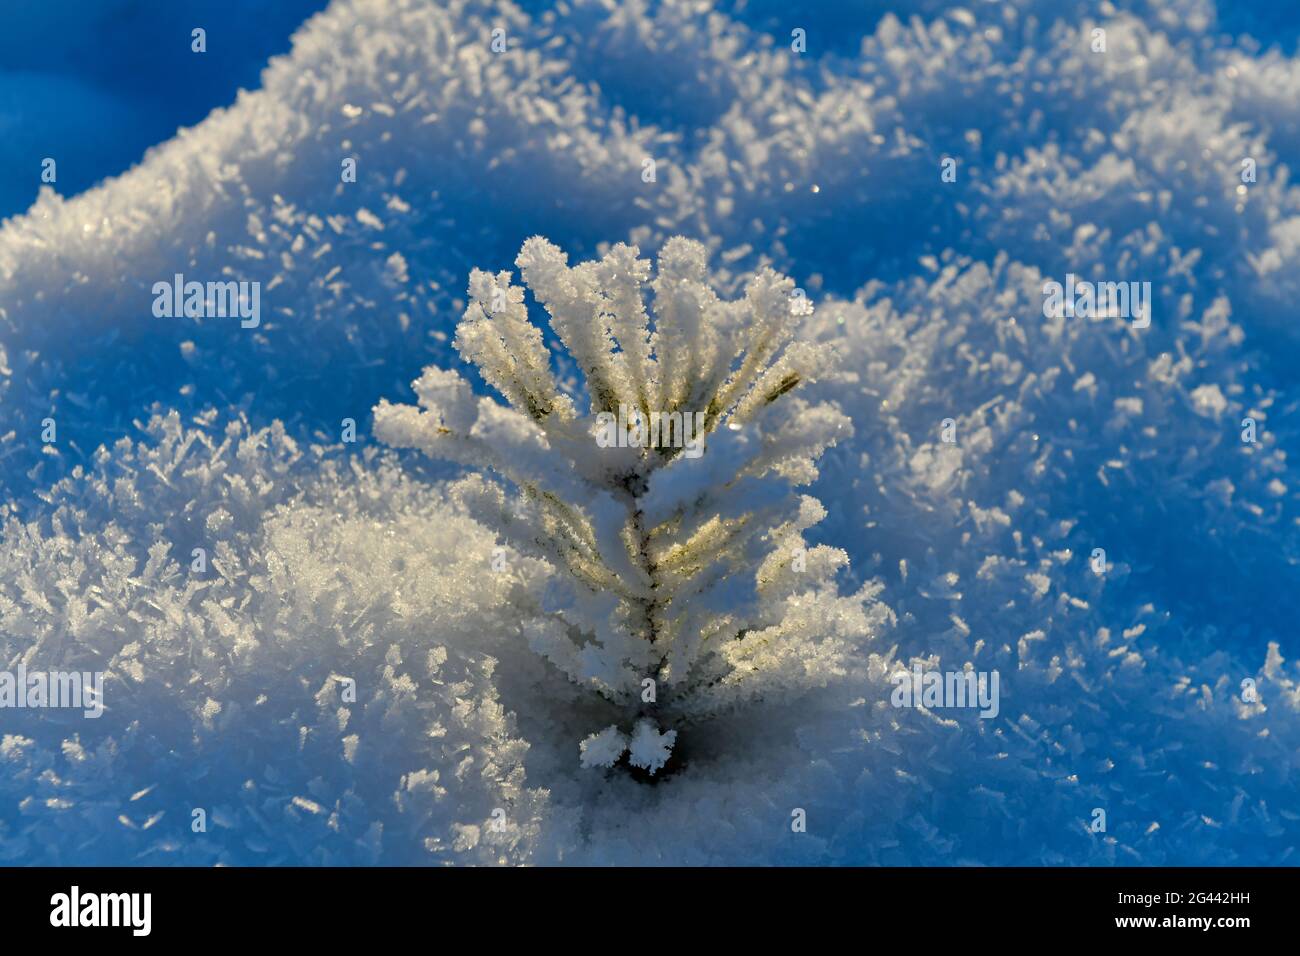 A tiny pine tree in winter full of hoarfrost and ice in the sunlight, Tallberg, Västerbottens Län, Sweden Stock Photo